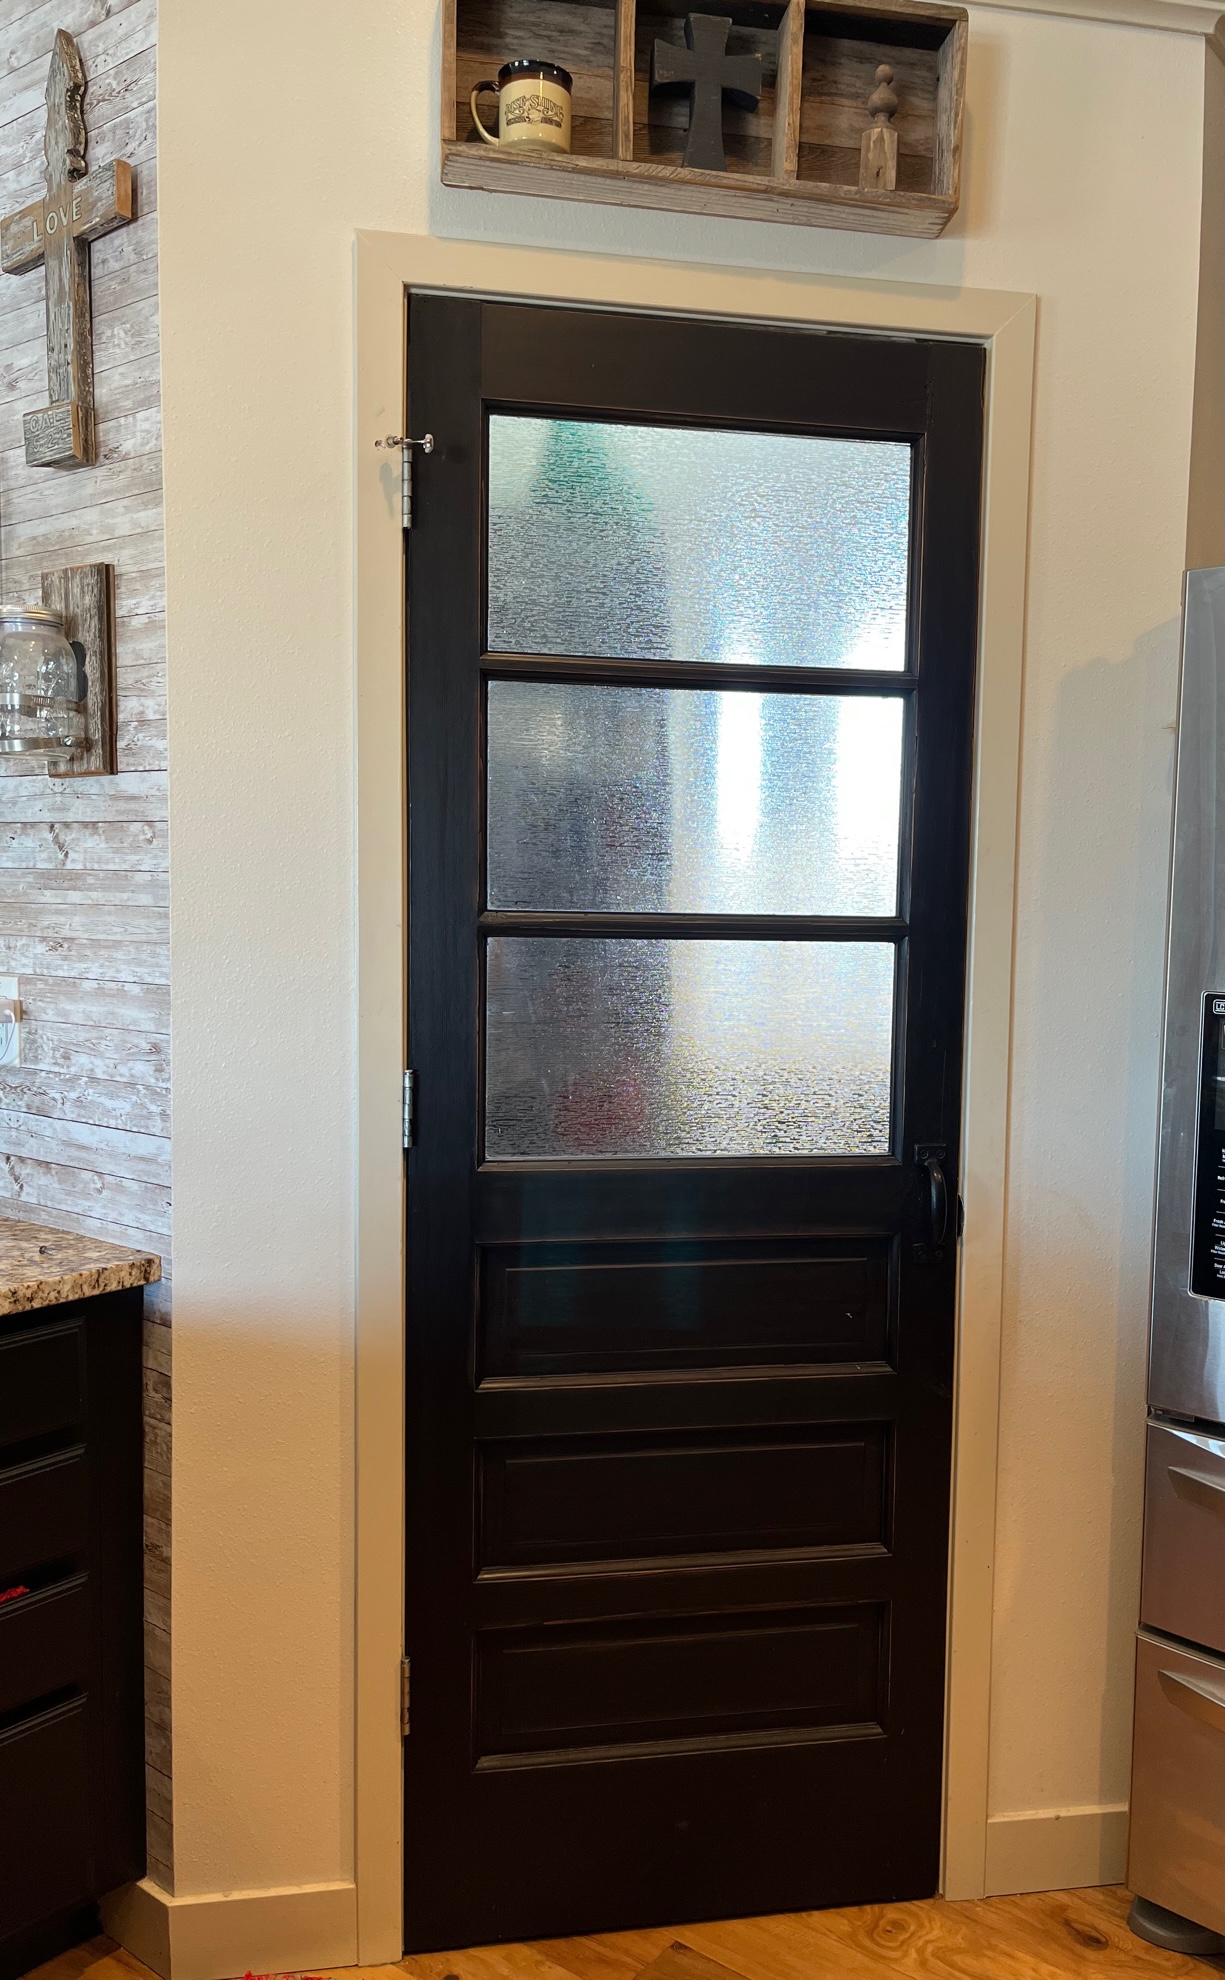 Curious about How to Use an Old Door? - From Farmhouse to Florida